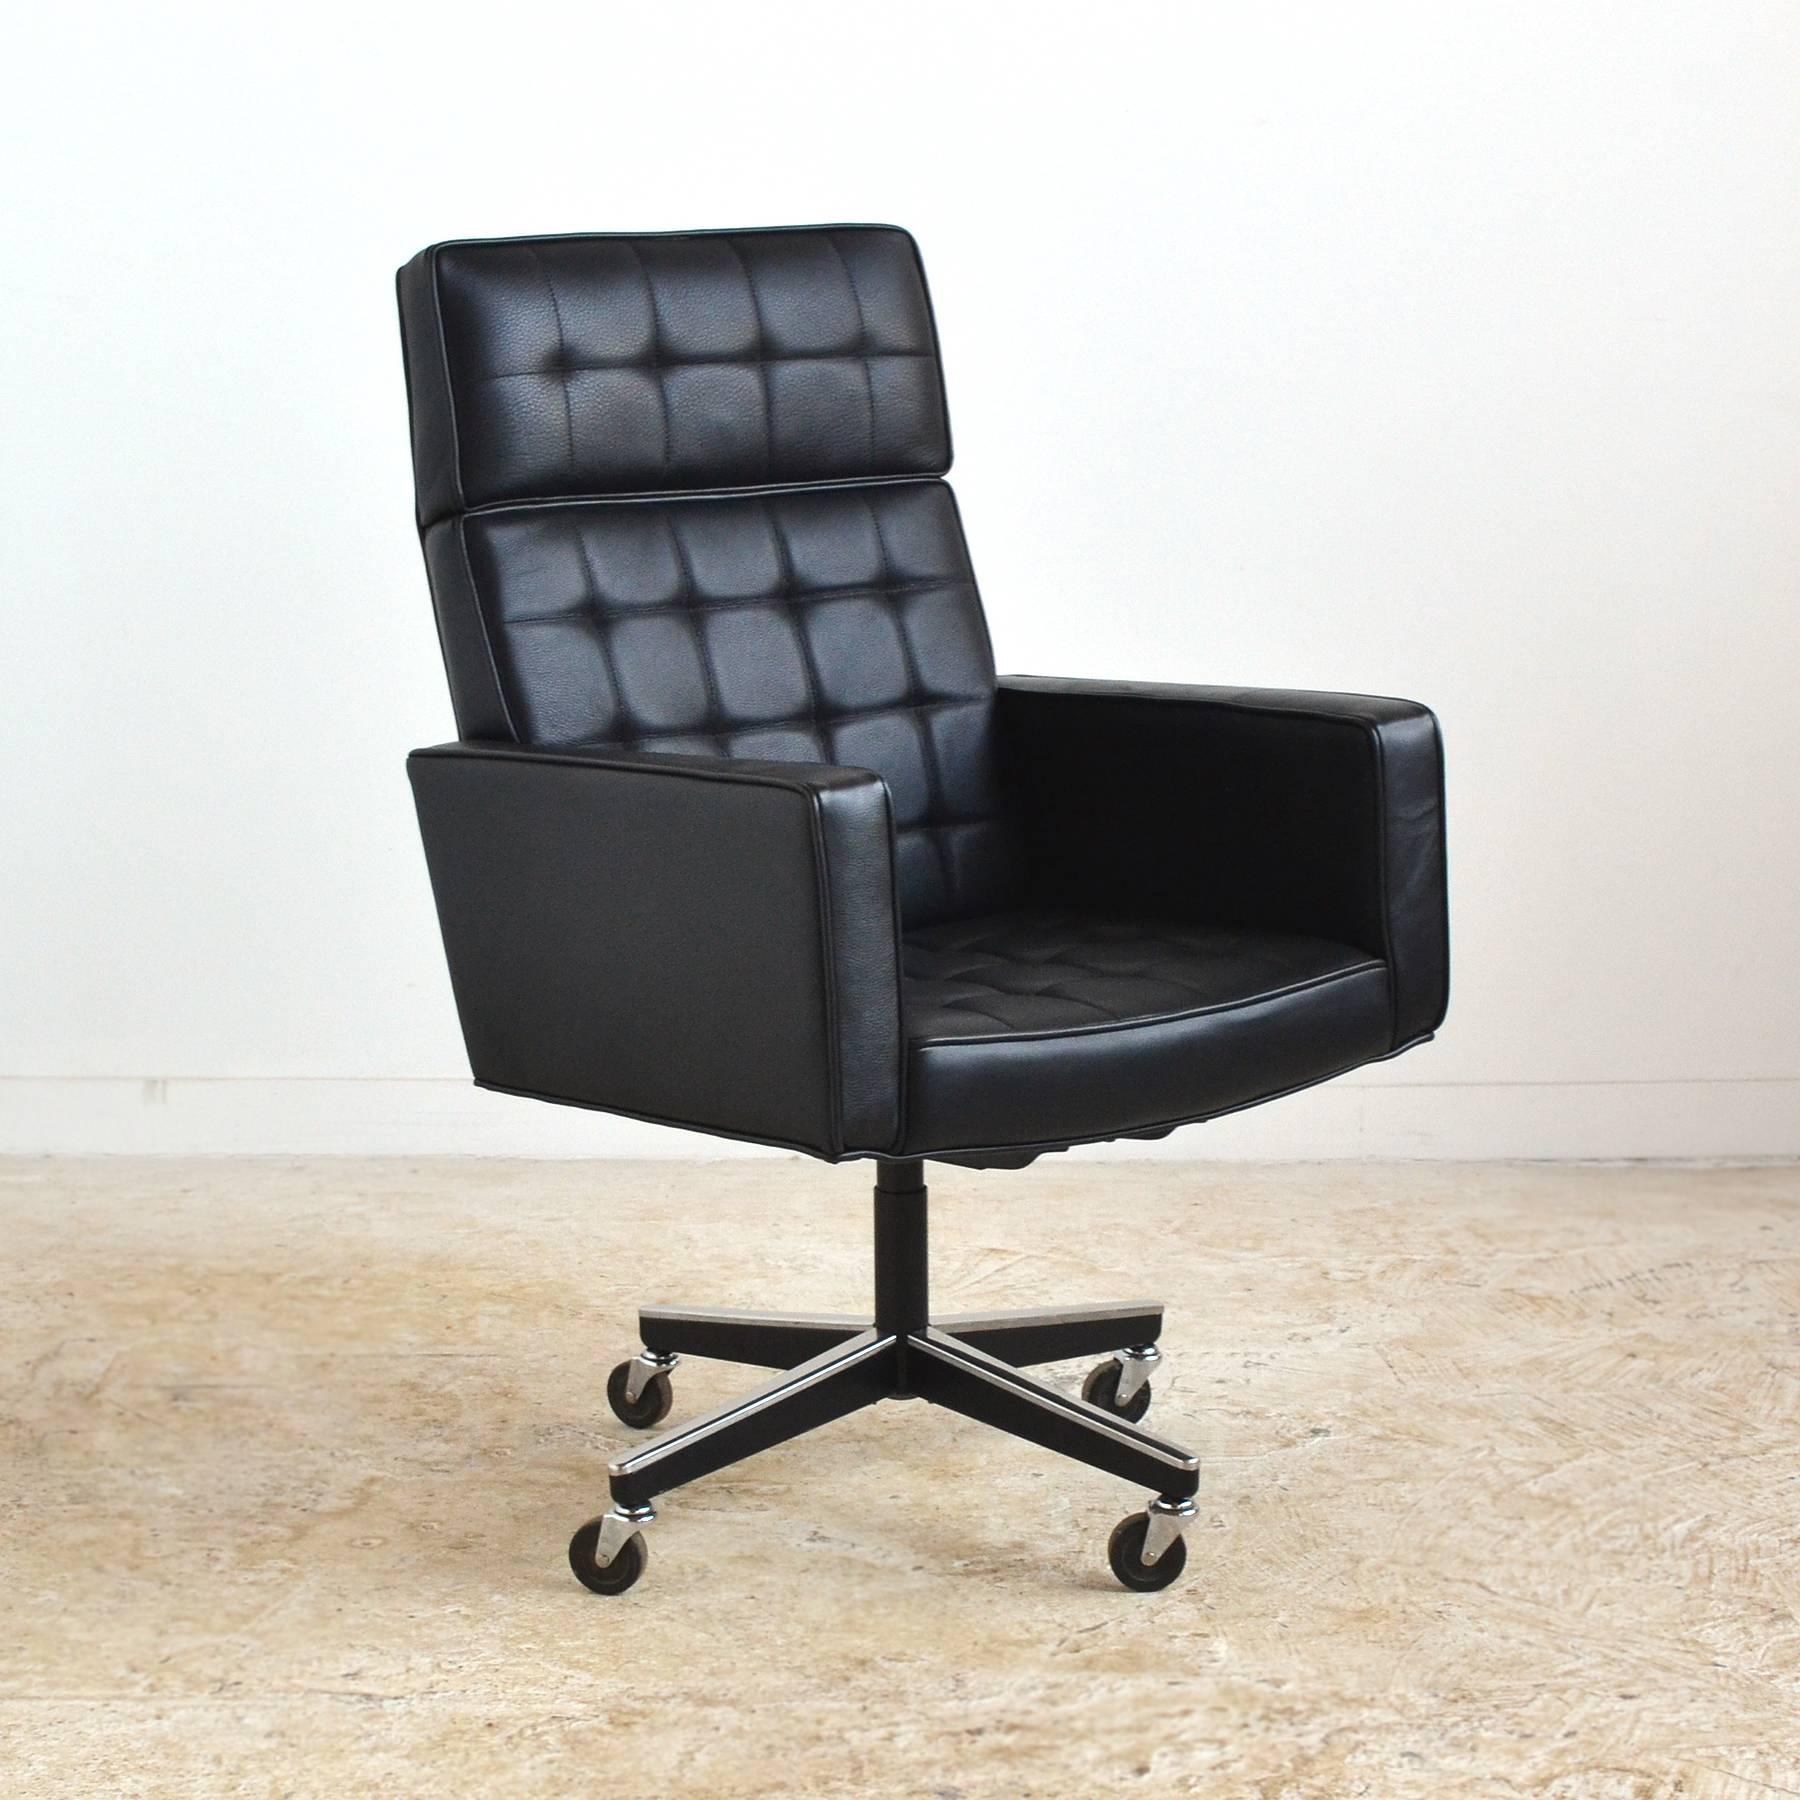 Long out of production, this large-scale executive armchair is a finely made piece by Knoll. Newly upholstered in rich black leather, this Classic design has tilt and swivel features on the four-star caster base.